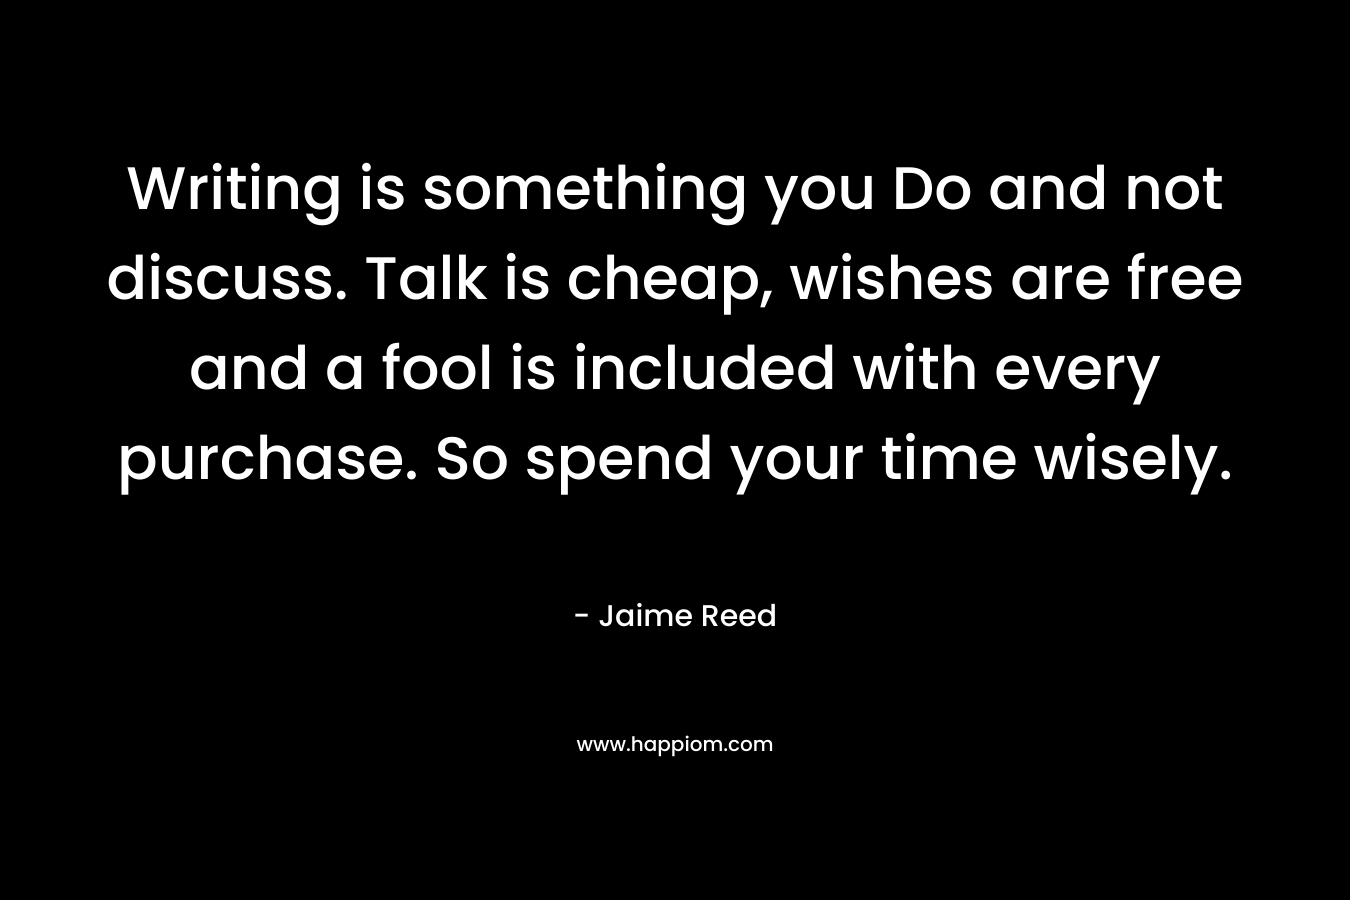 Writing is something you Do and not discuss. Talk is cheap, wishes are free and a fool is included with every purchase. So spend your time wisely. – Jaime Reed